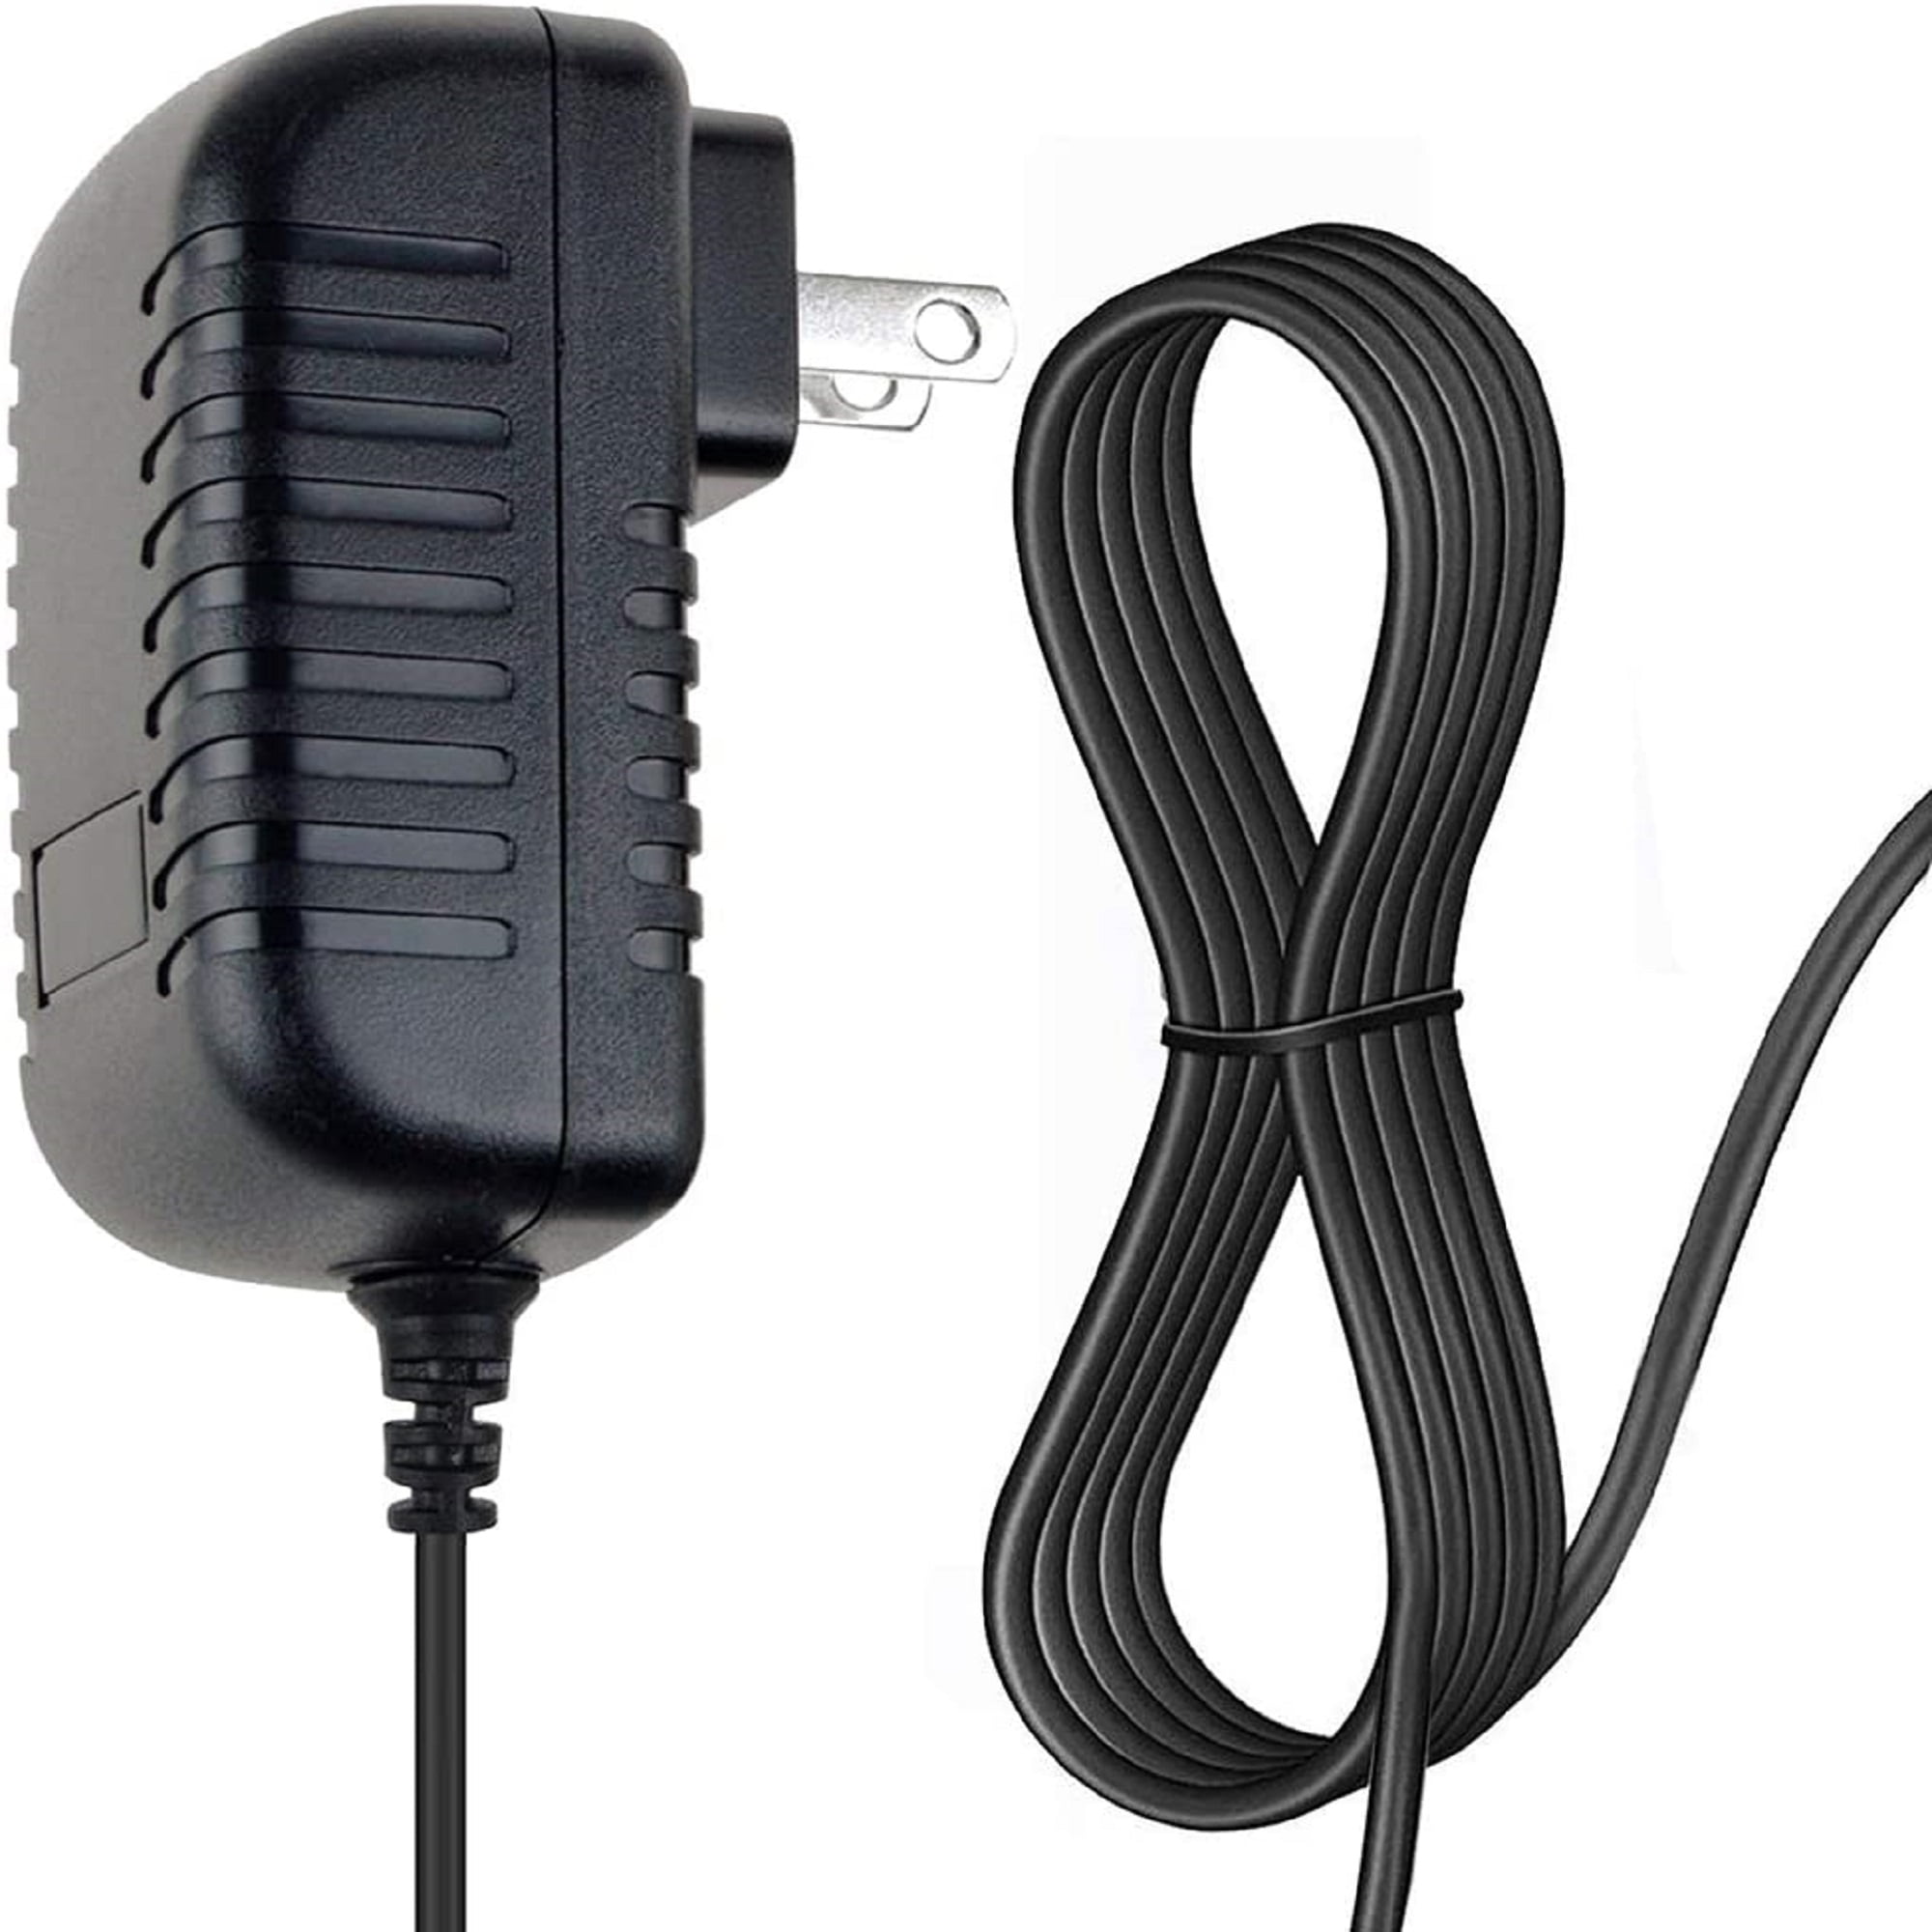 AC Adapter For Xantrex DURACELL DPP-600HD Powerpack 600 600W Charger Power PSU 